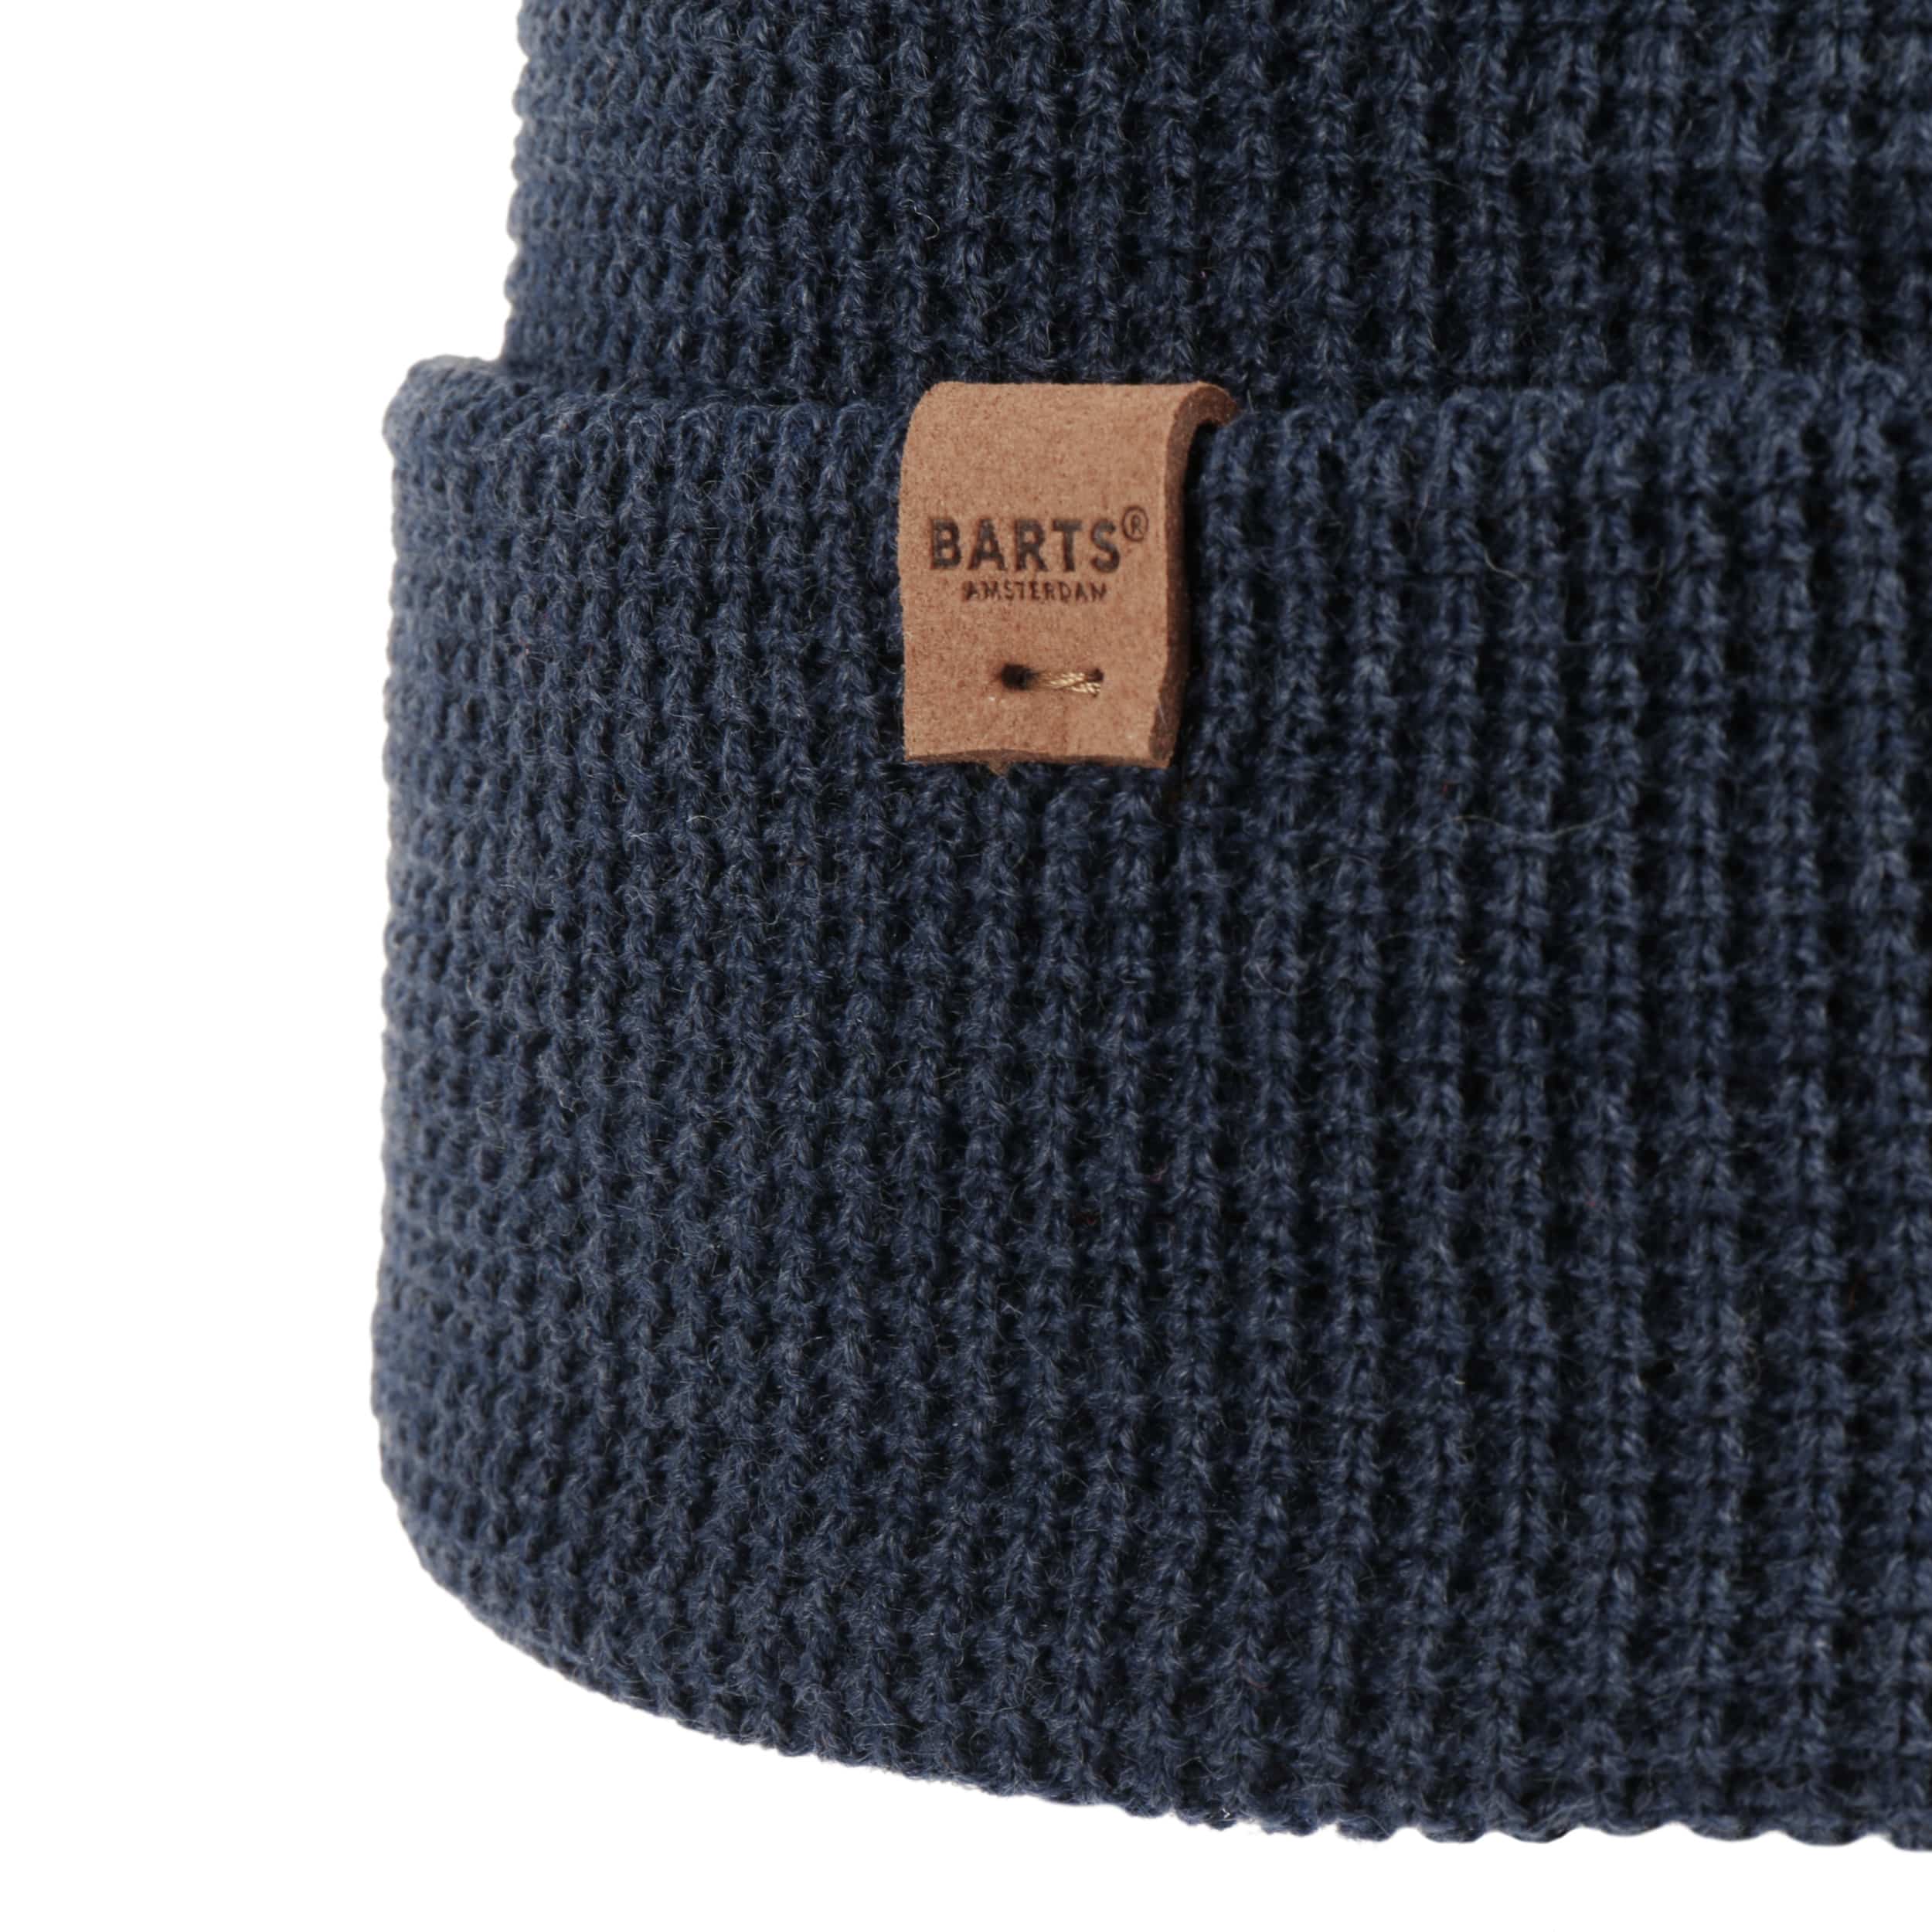 Coler Beanie Hat Barts € 26,95 - by